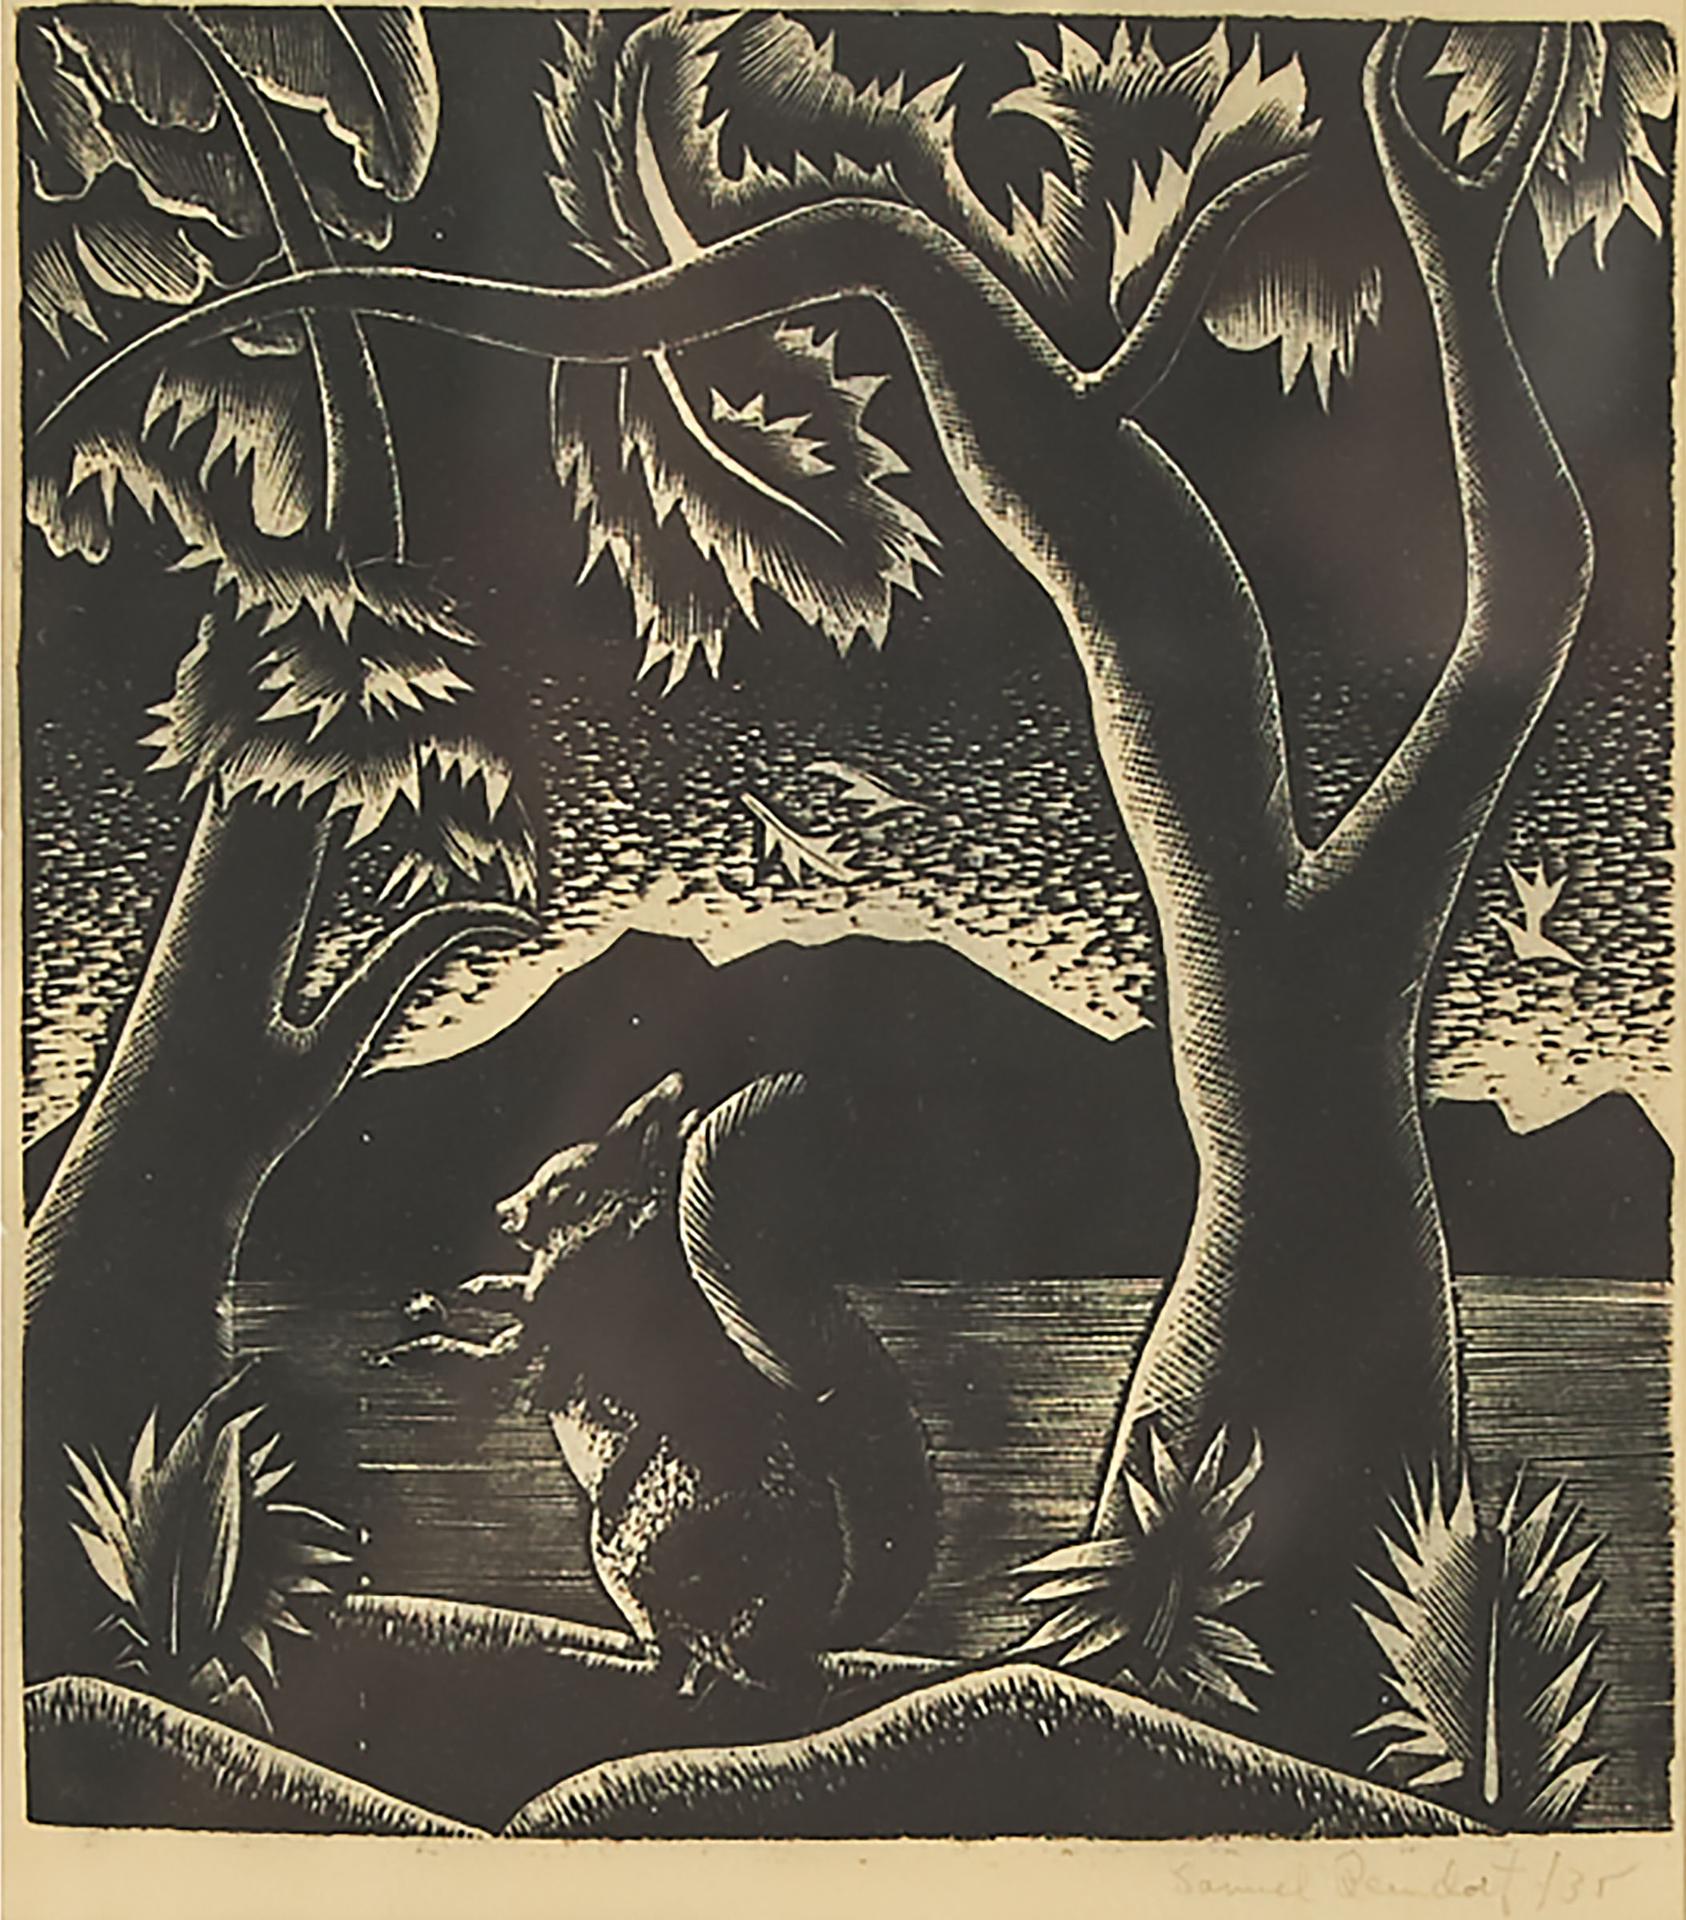 Samuel Reindorf (1914-1988) - Squirrel By The Lake, 1935